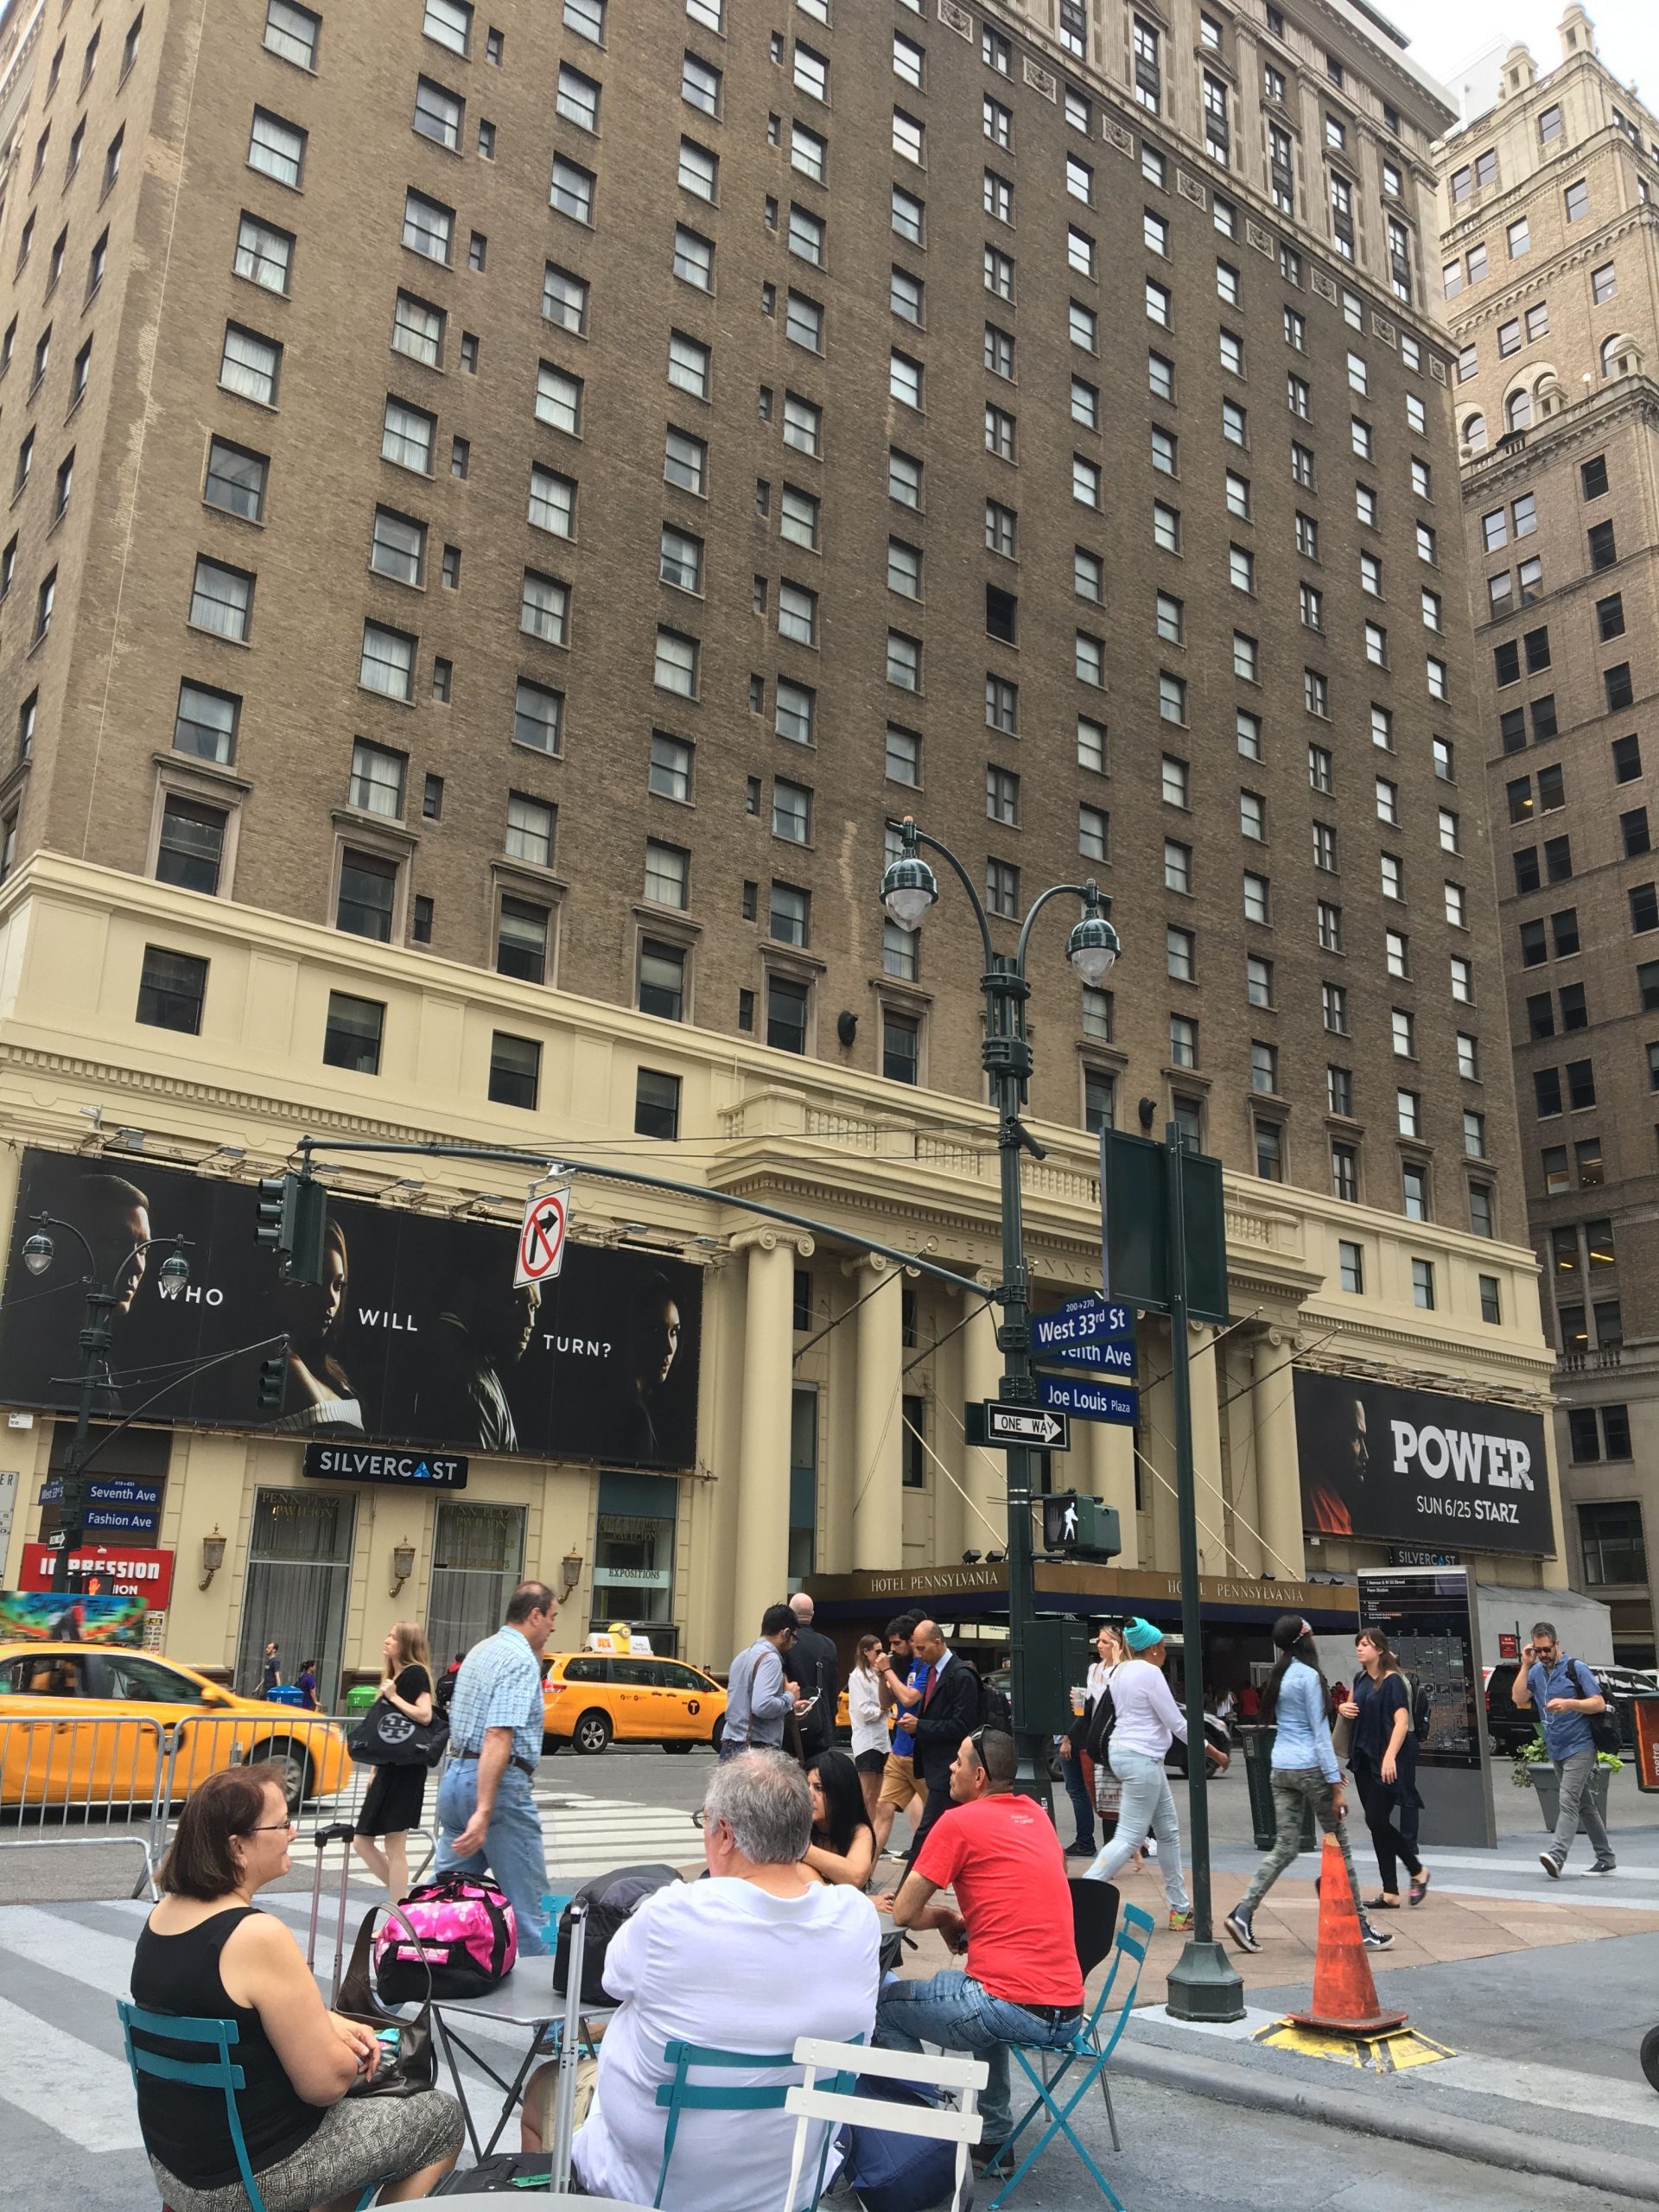 Hotel Pennsylvania great place to stay in New York City 2017